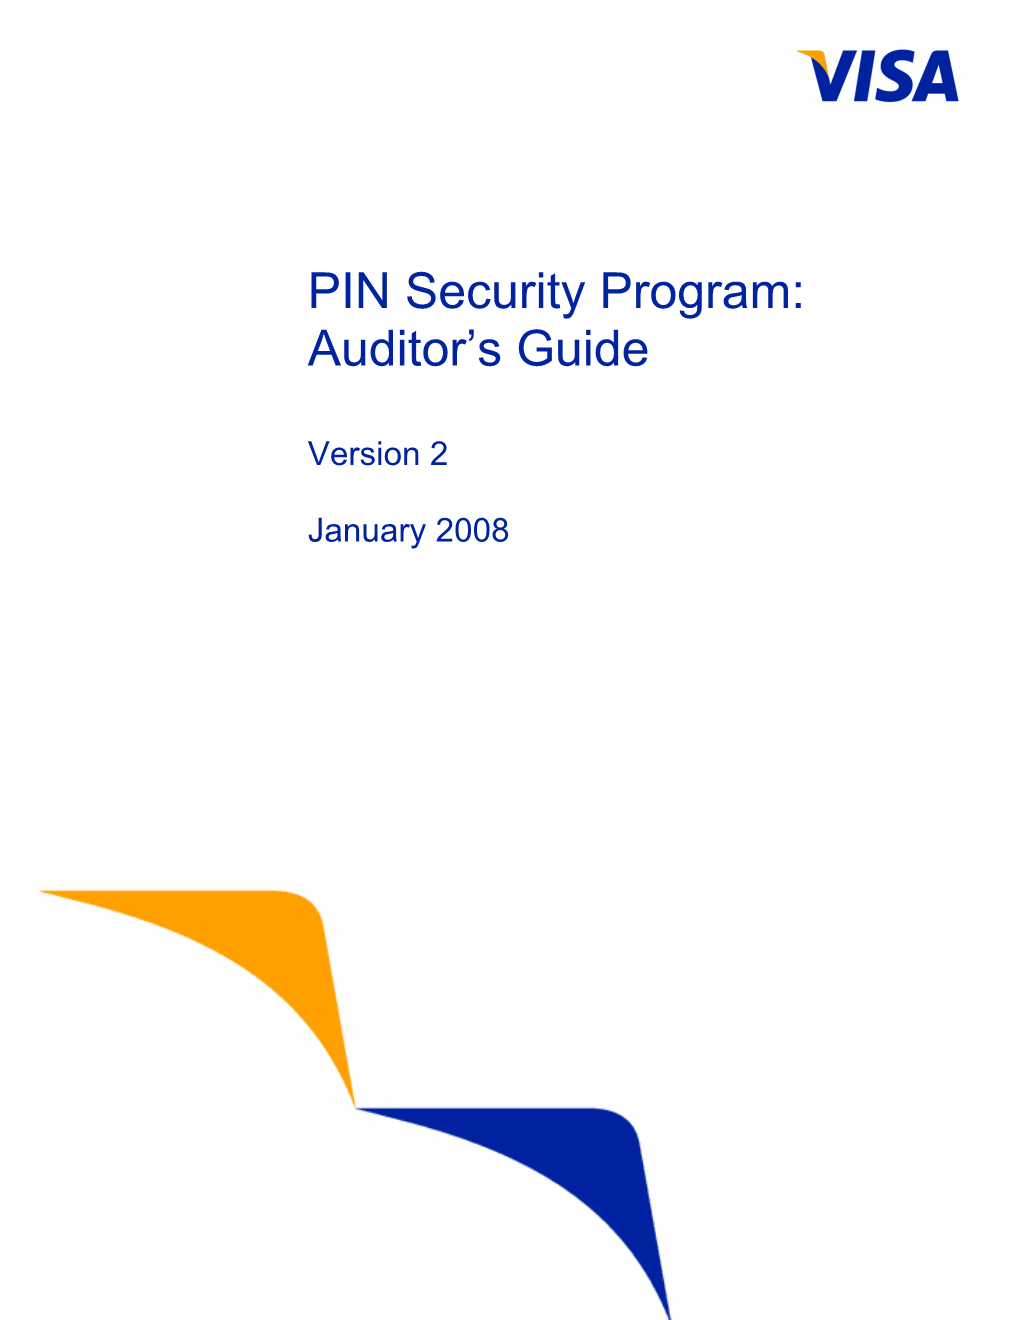 PIN Security Auditor's Guide